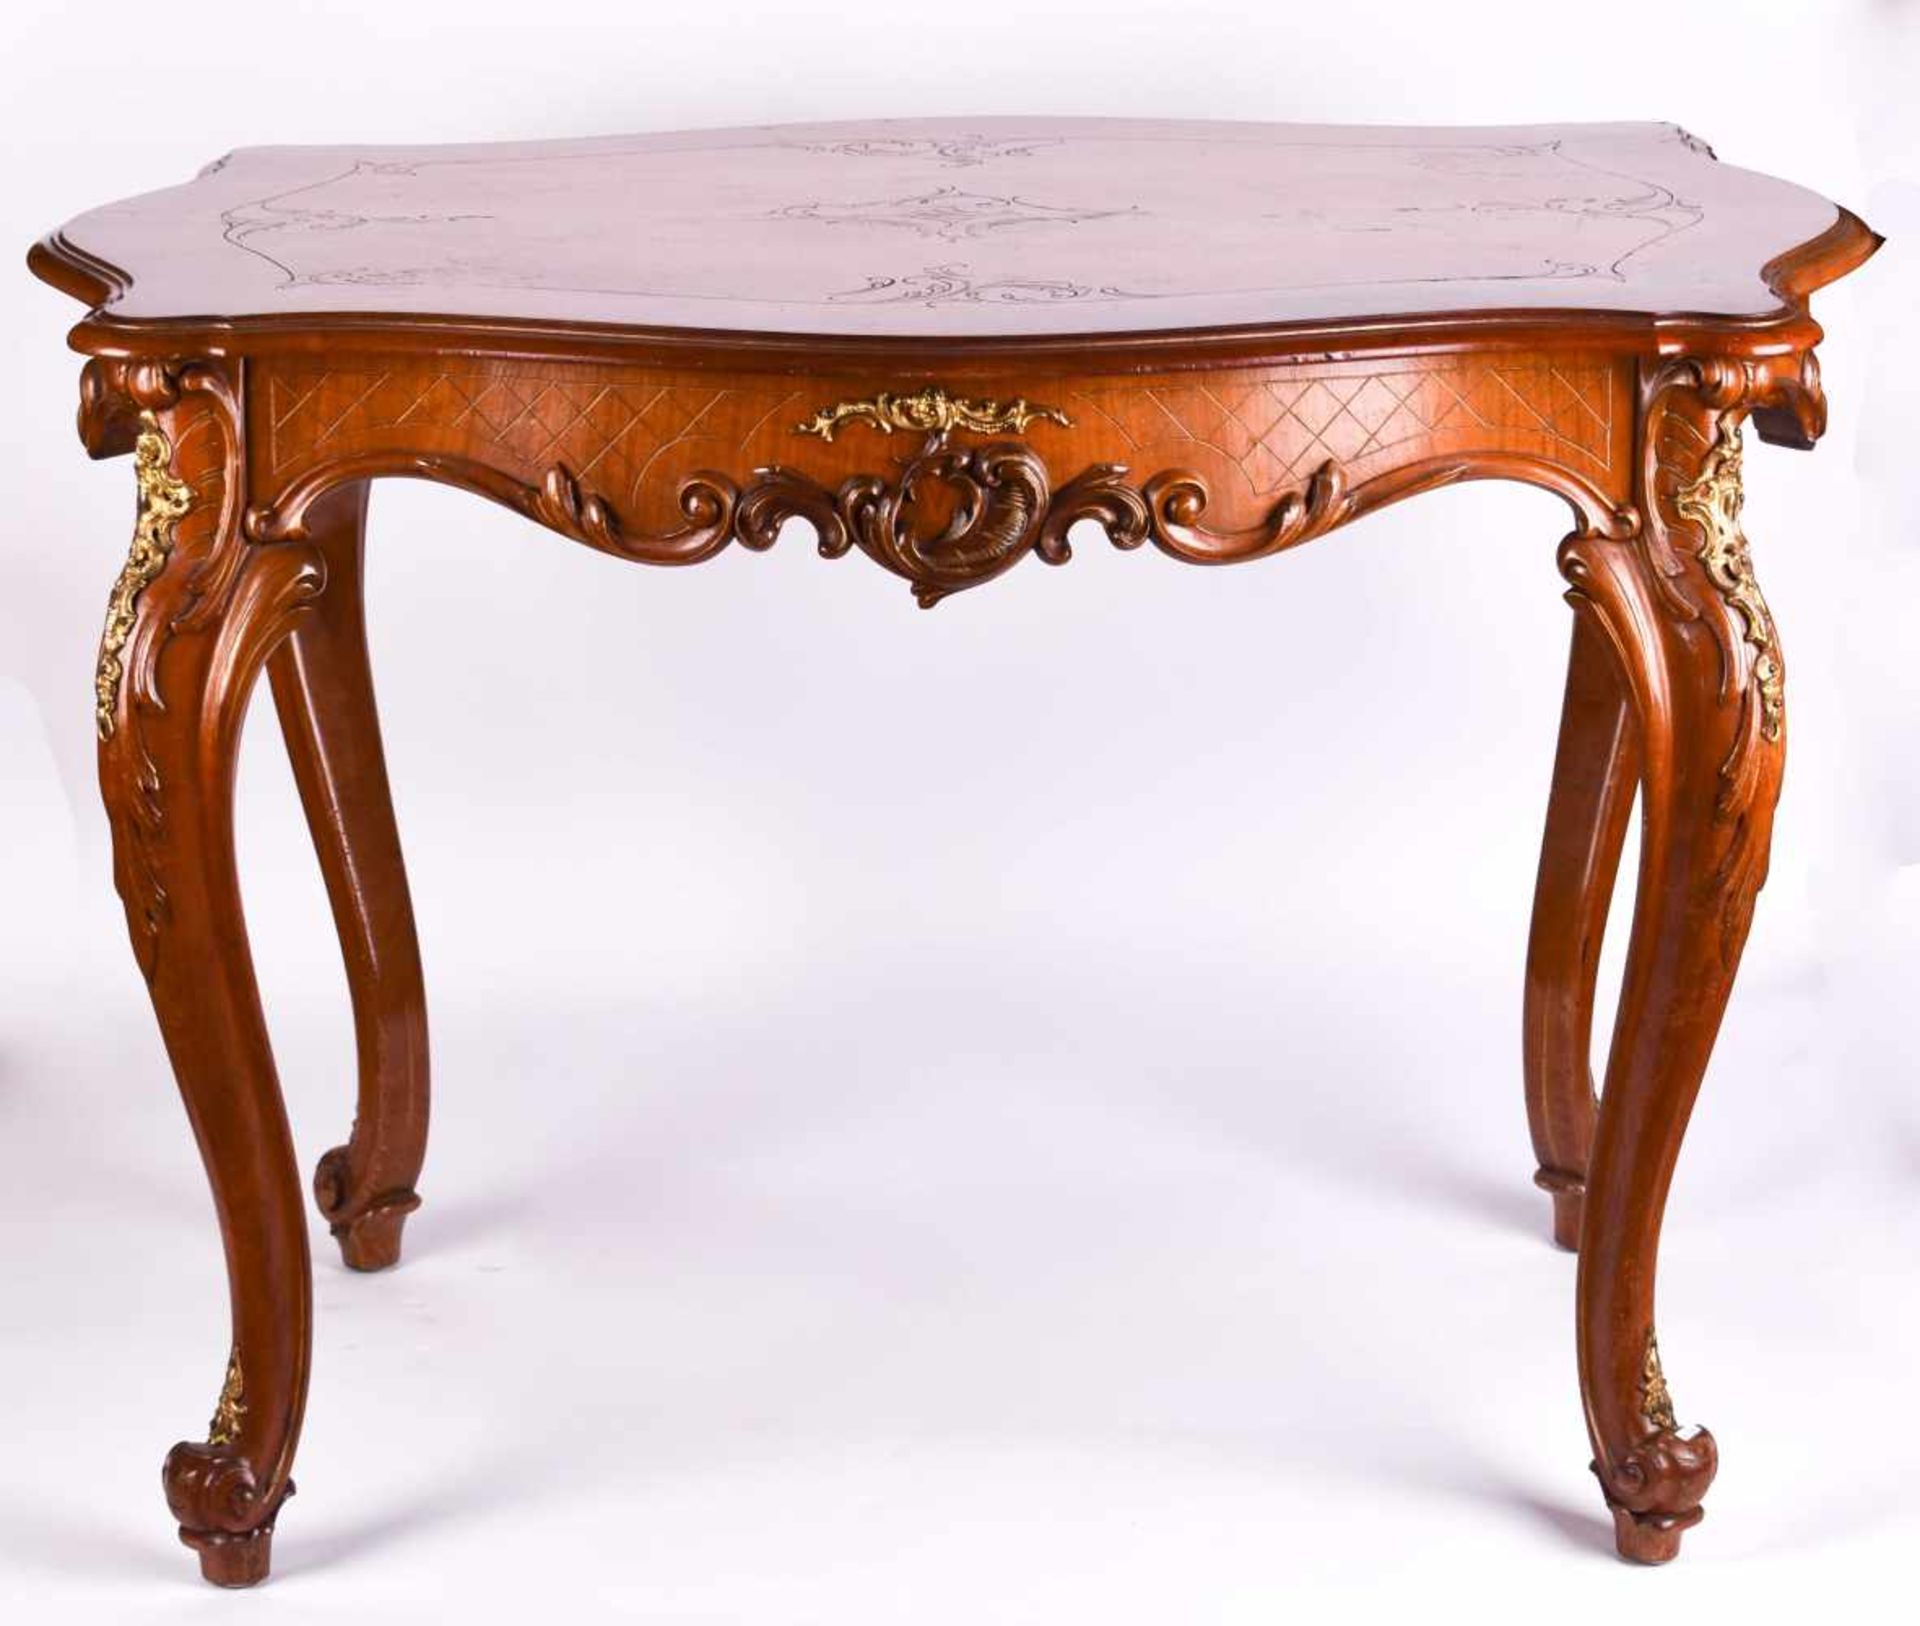 Table Louis Philippe around 1870wood, with brass applications, 74 cm x 106 cm x 76 cmTisch Louis